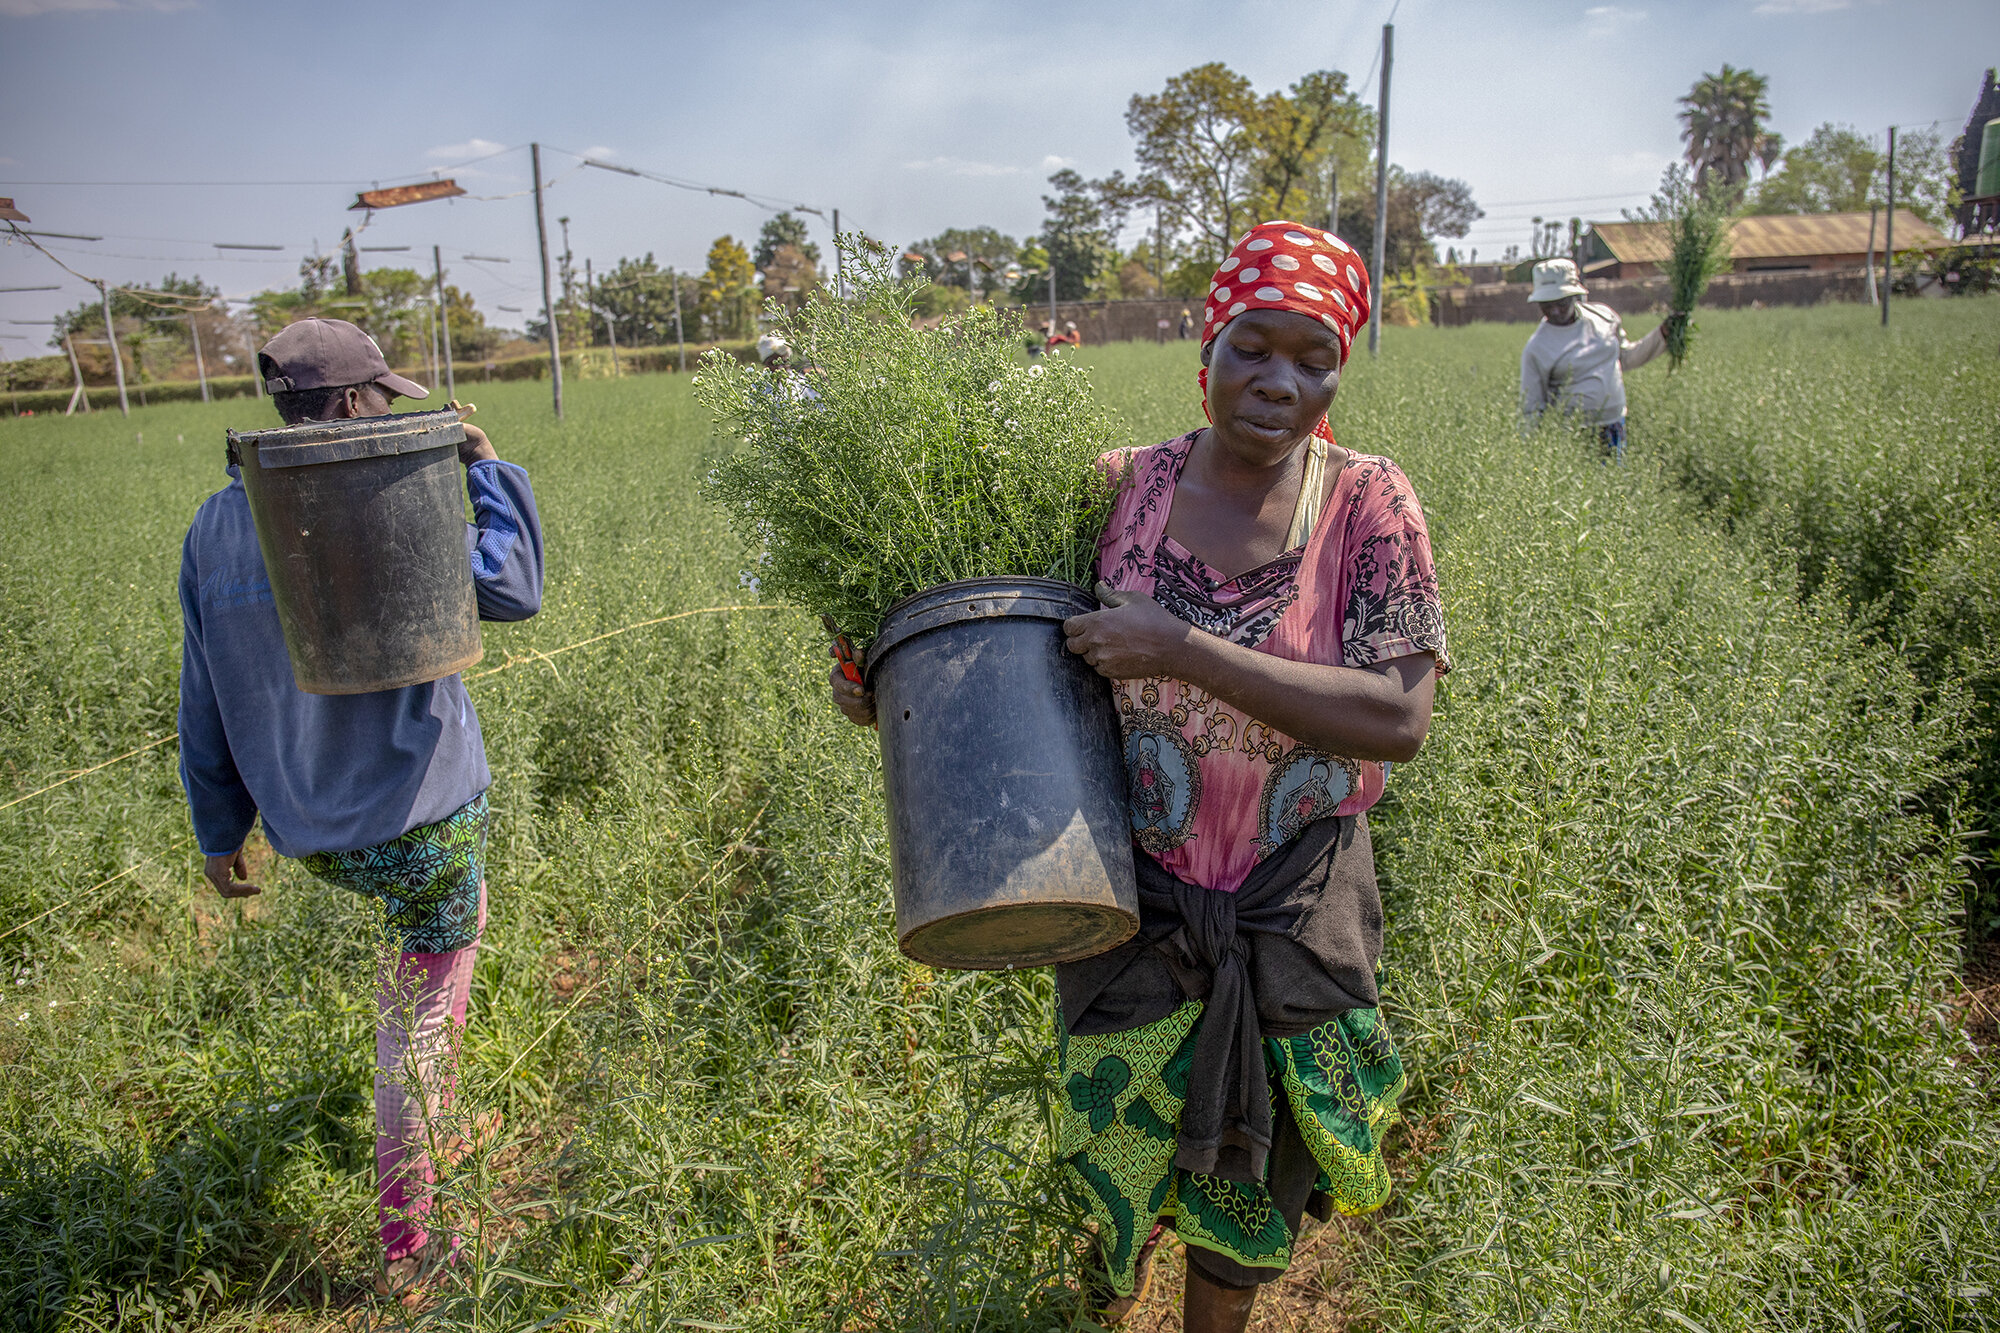  October 10, 2018: Rekina Chivhange carries a bucket of Paquita flowers during the harvesting season at the farm. As a general hand, her work is seasonal and depends on what is happening at the farm during a particular period. 